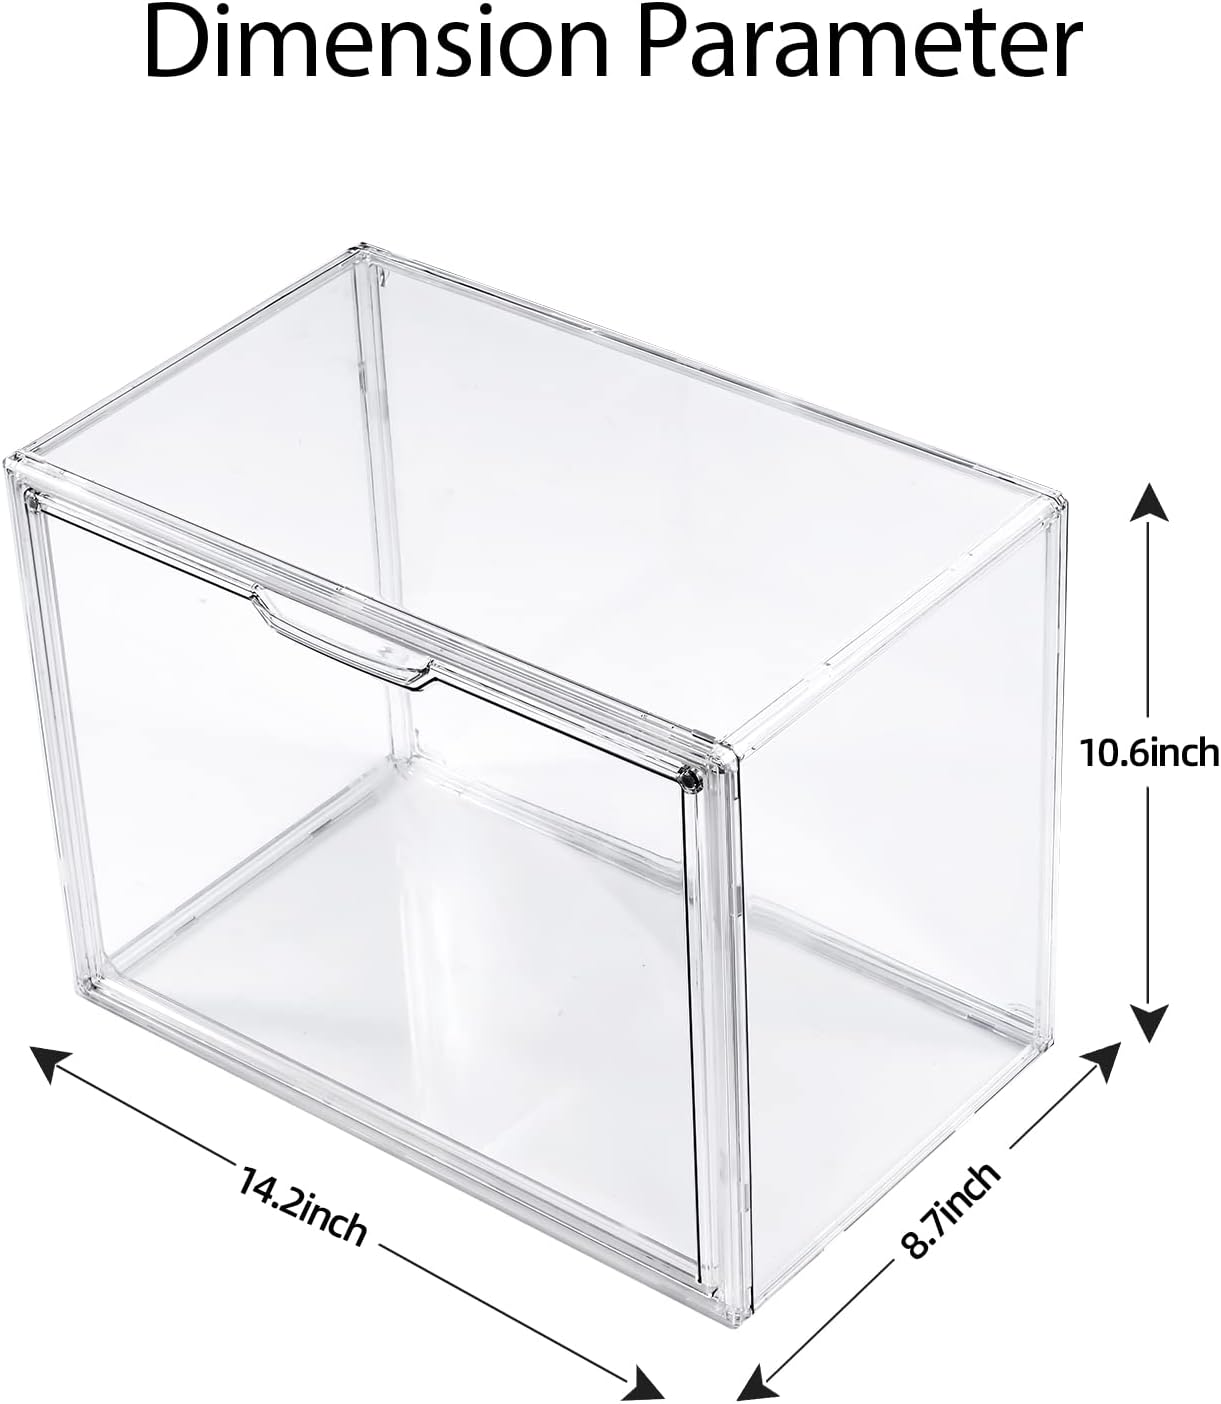 starogegc 3Pack Clear Plastic Handbag Storage Organizer for Closet, Acrylic Display Case for Handbag and Purse, Luxury Stackable Magnetic